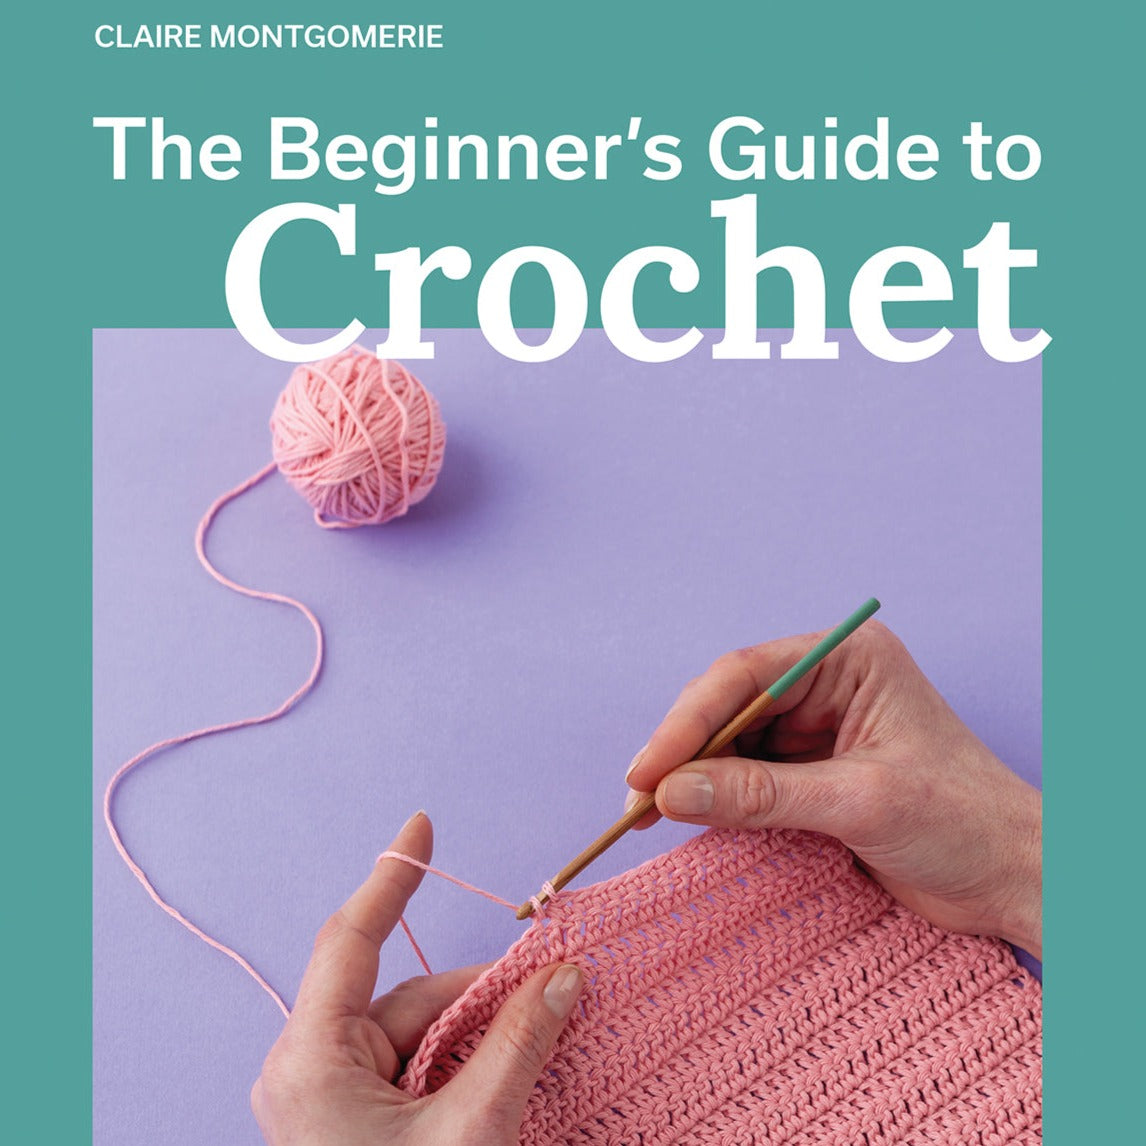 The Beginners Guide to Crochet - Claire Montgomerie